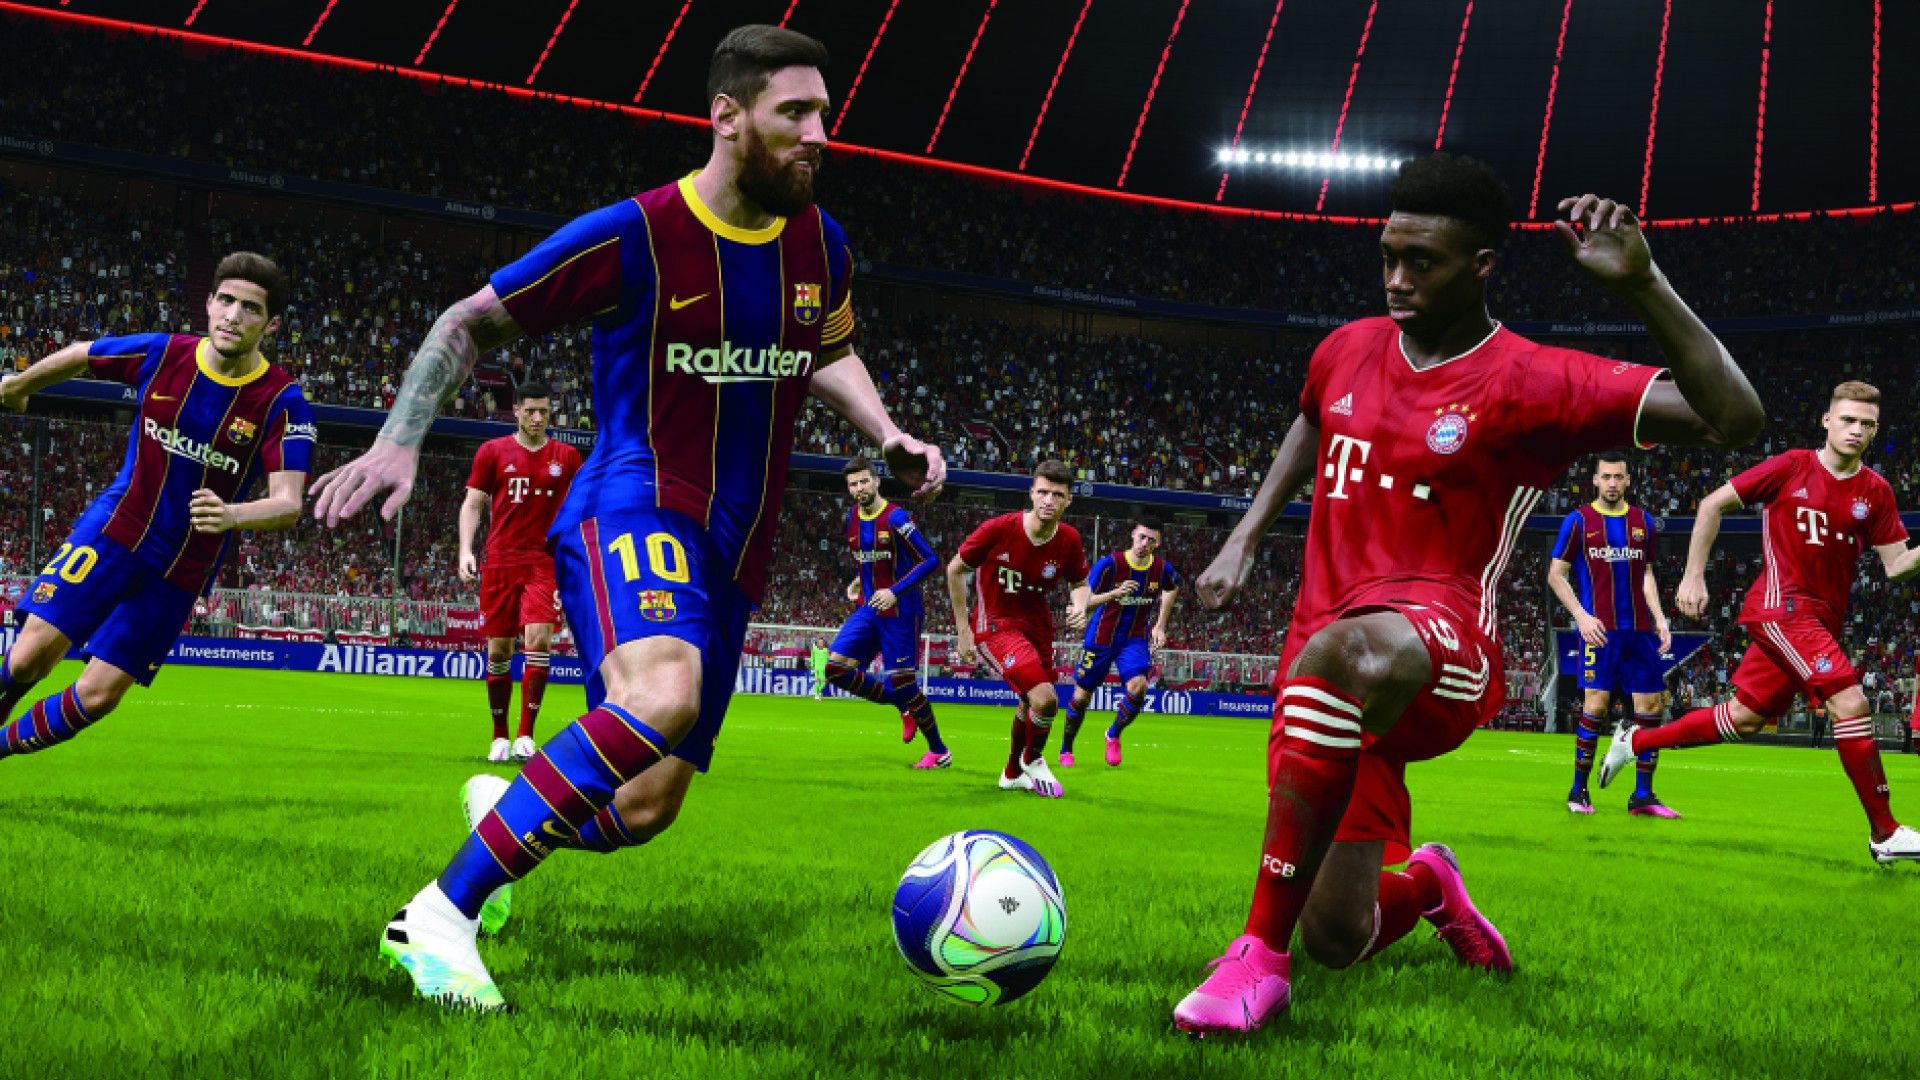 Soccer Icon Messi and Ronaldo Make History in the 25th Year Anniversary of the PES Franchise